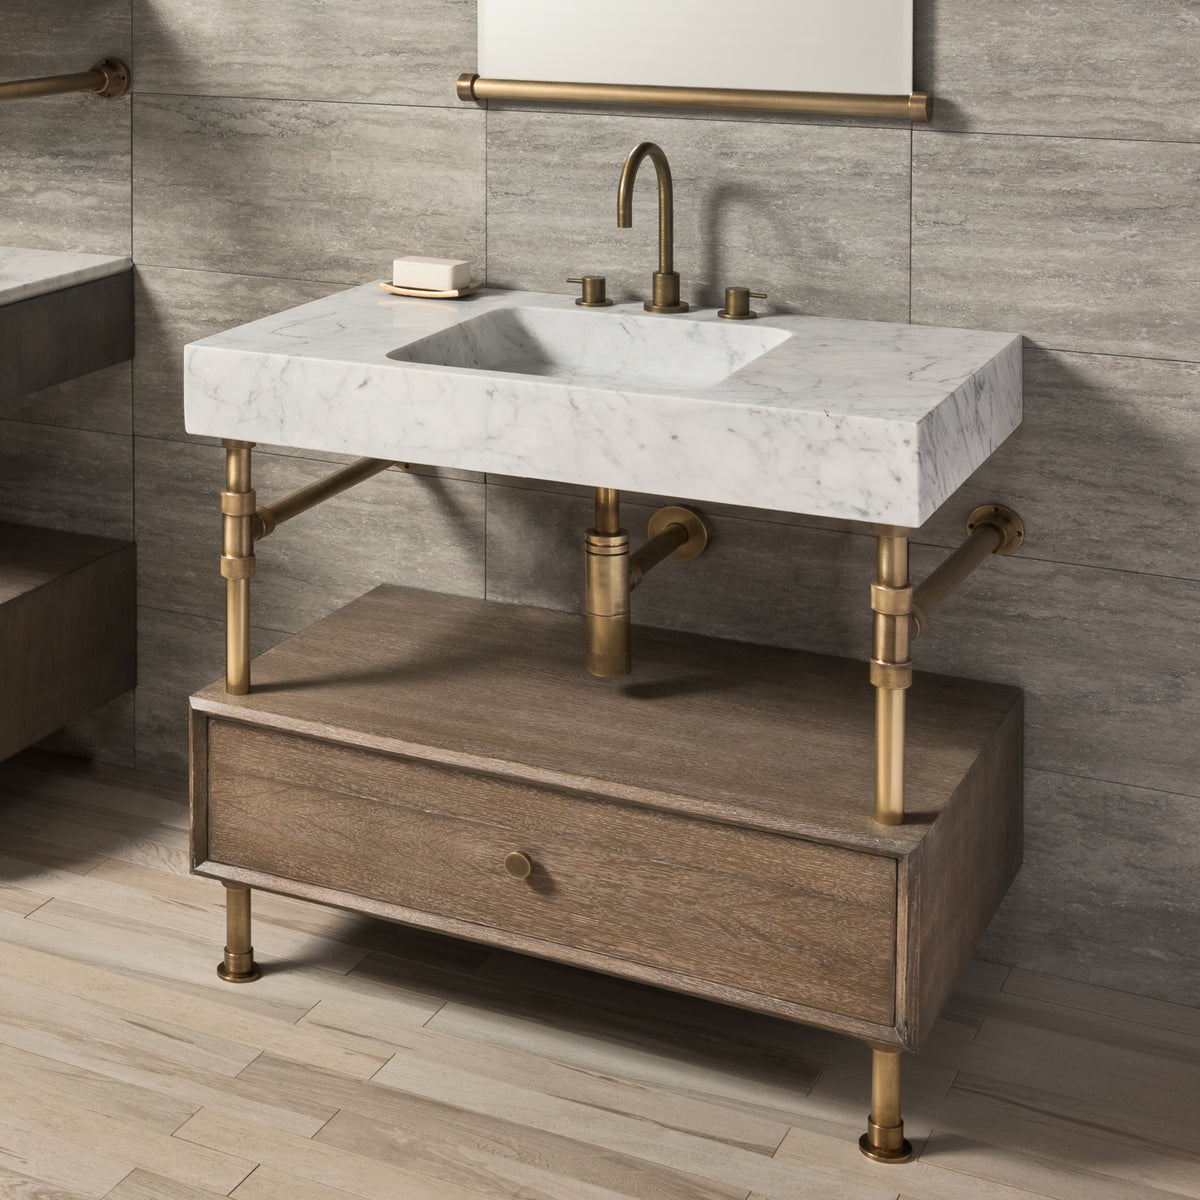 Terra Bath Sink paired with Elemental Classic Drawer Vanity image 1 of 4